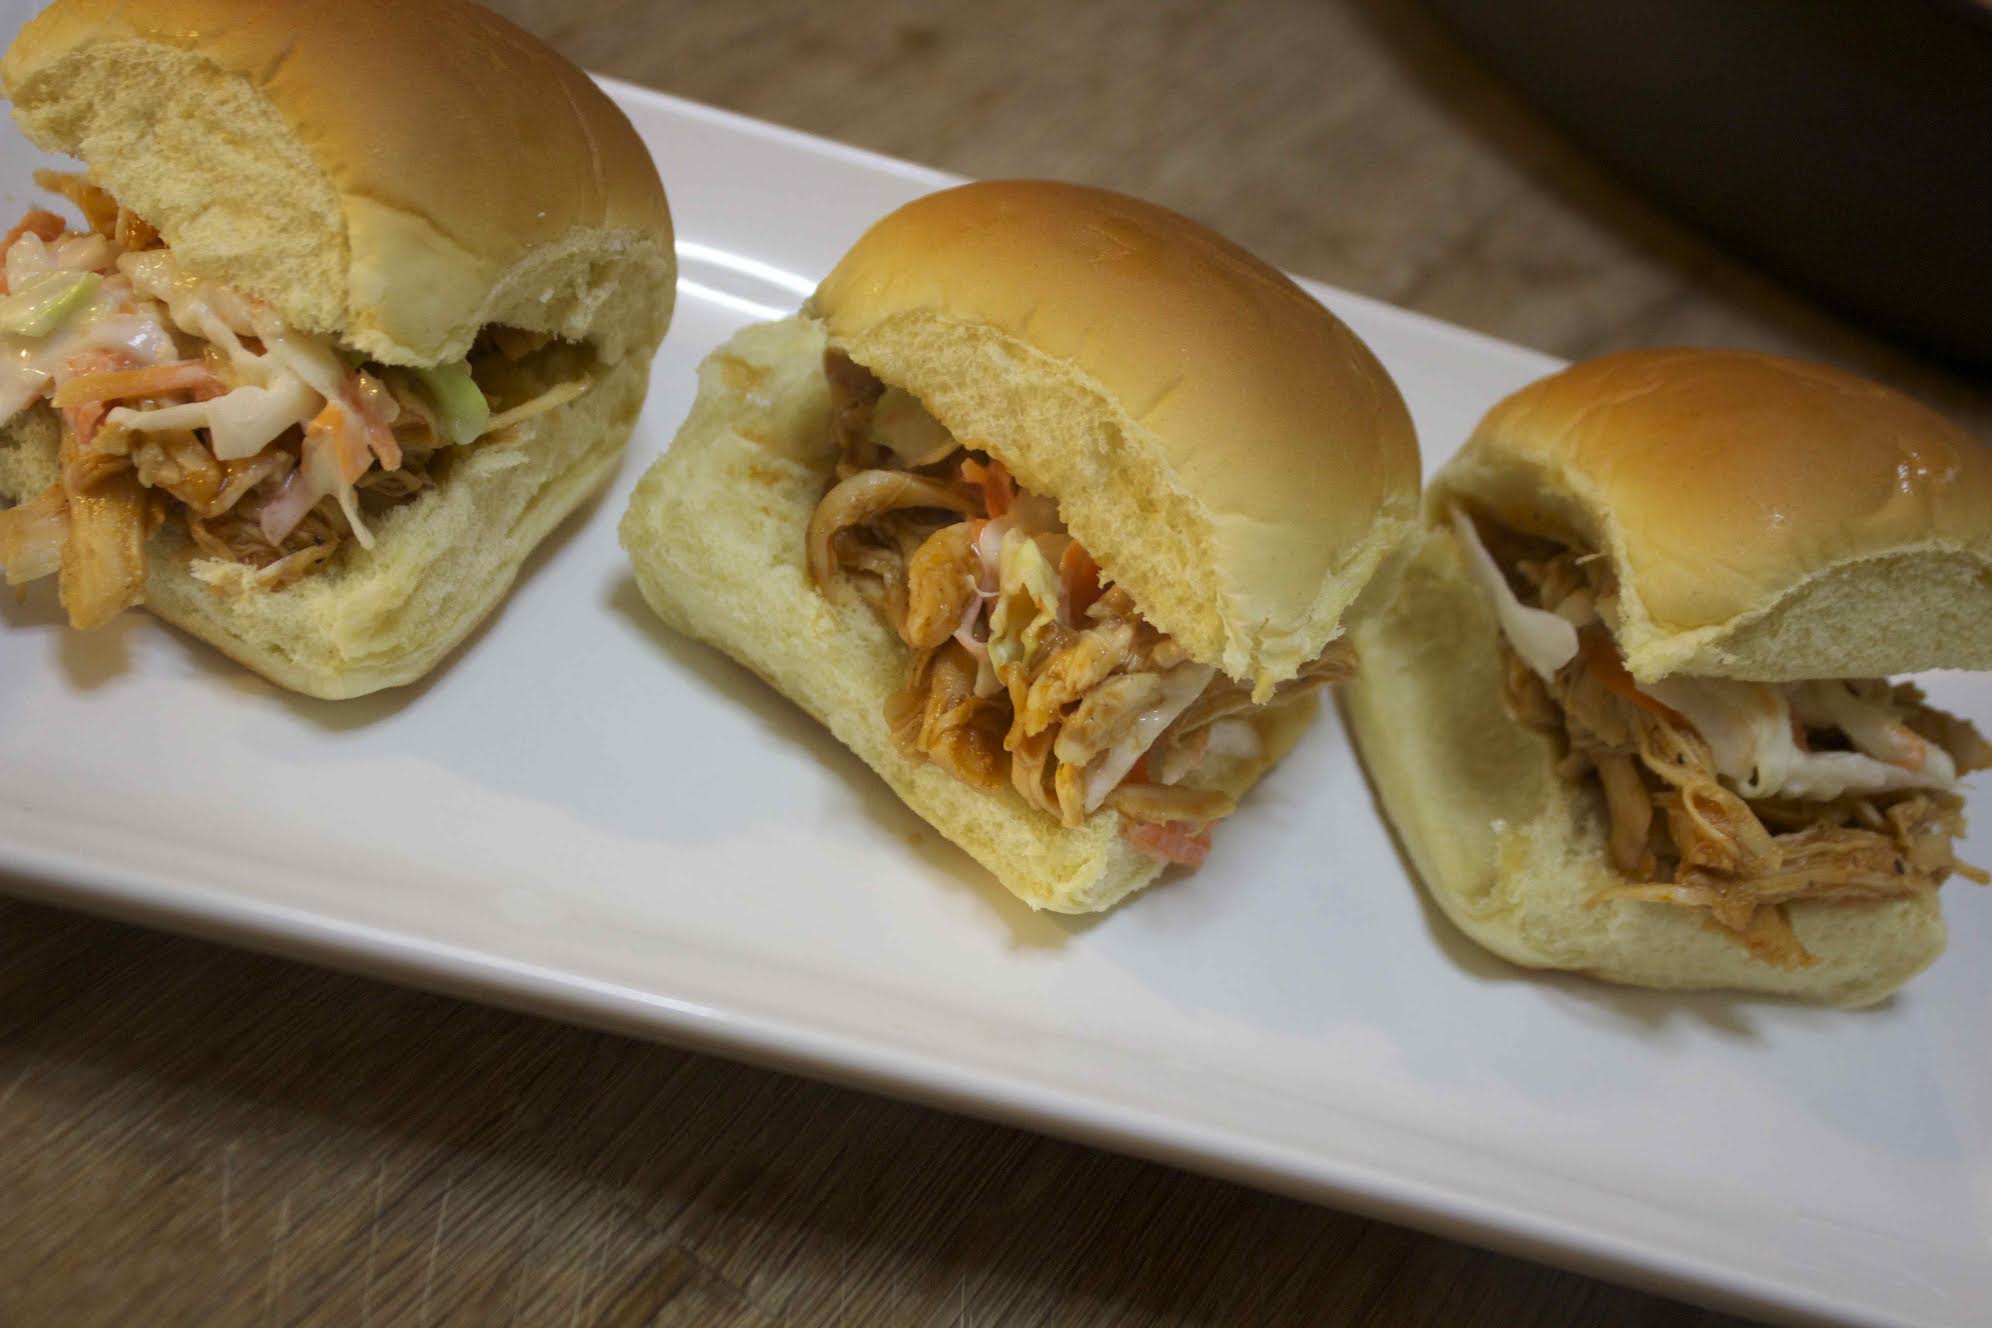 These BBQ pulled chicken sliders are made with a delicious homemade BBQ sauce that's super easy to make with common ingredients